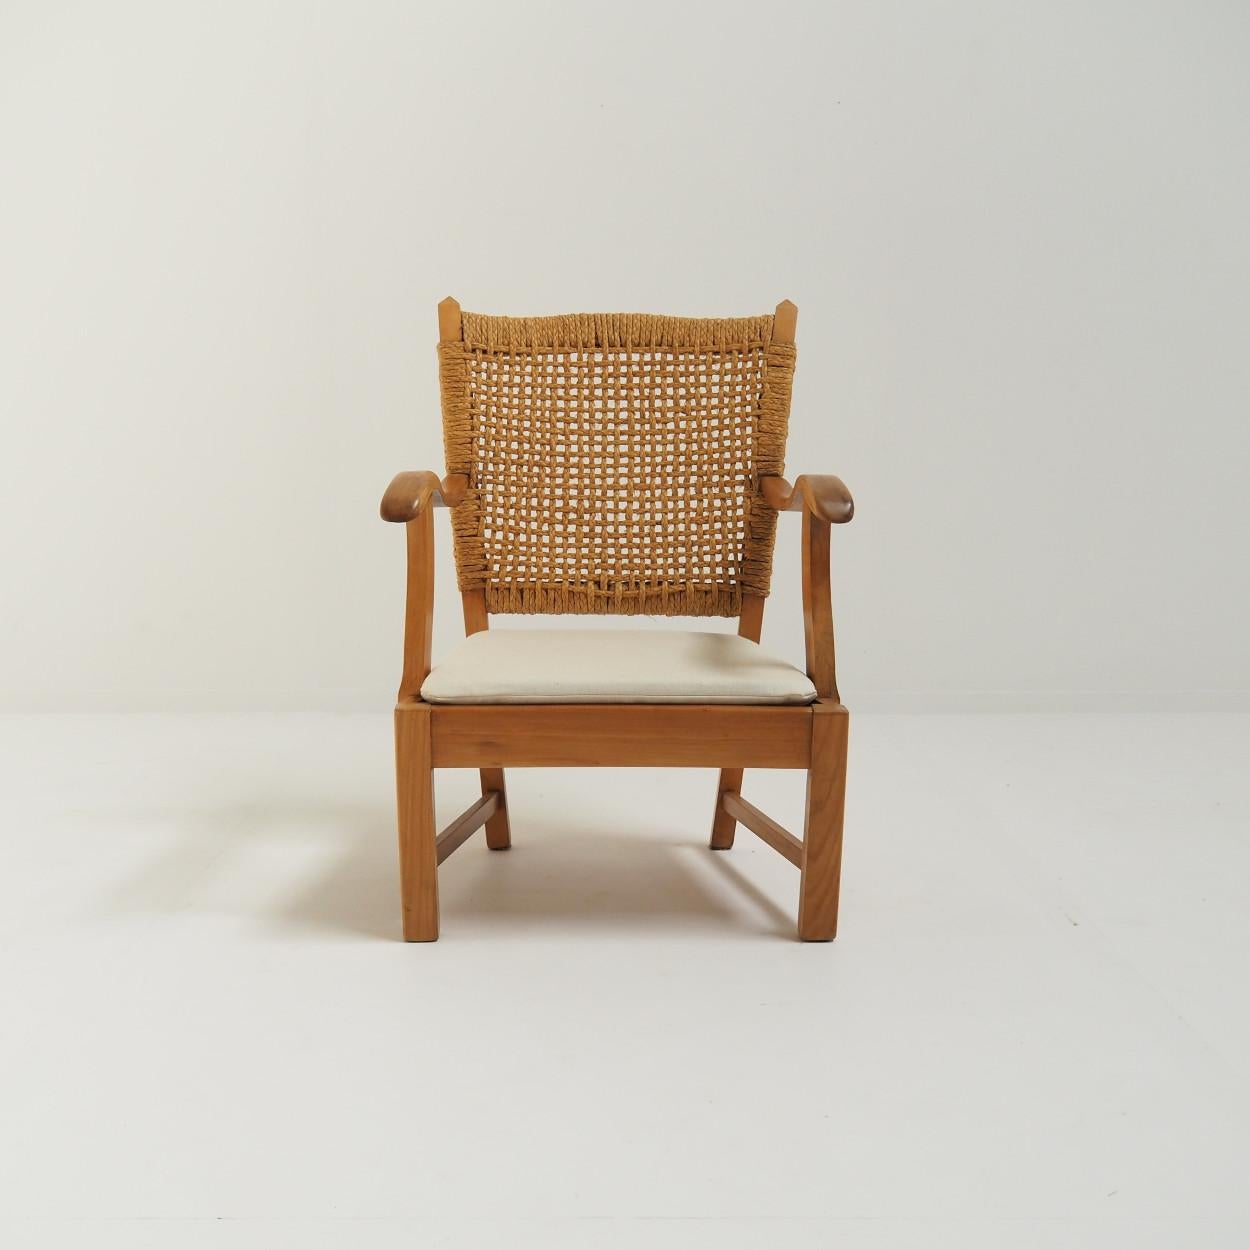 Typical 1930s modernist chair attributed to Dutch designer Bas van Pelt, most likely produced in the 1940s or 1950s.

The chair is in very good condition, where all the woodwork has been completely checked and refinished. The seat cushion has also